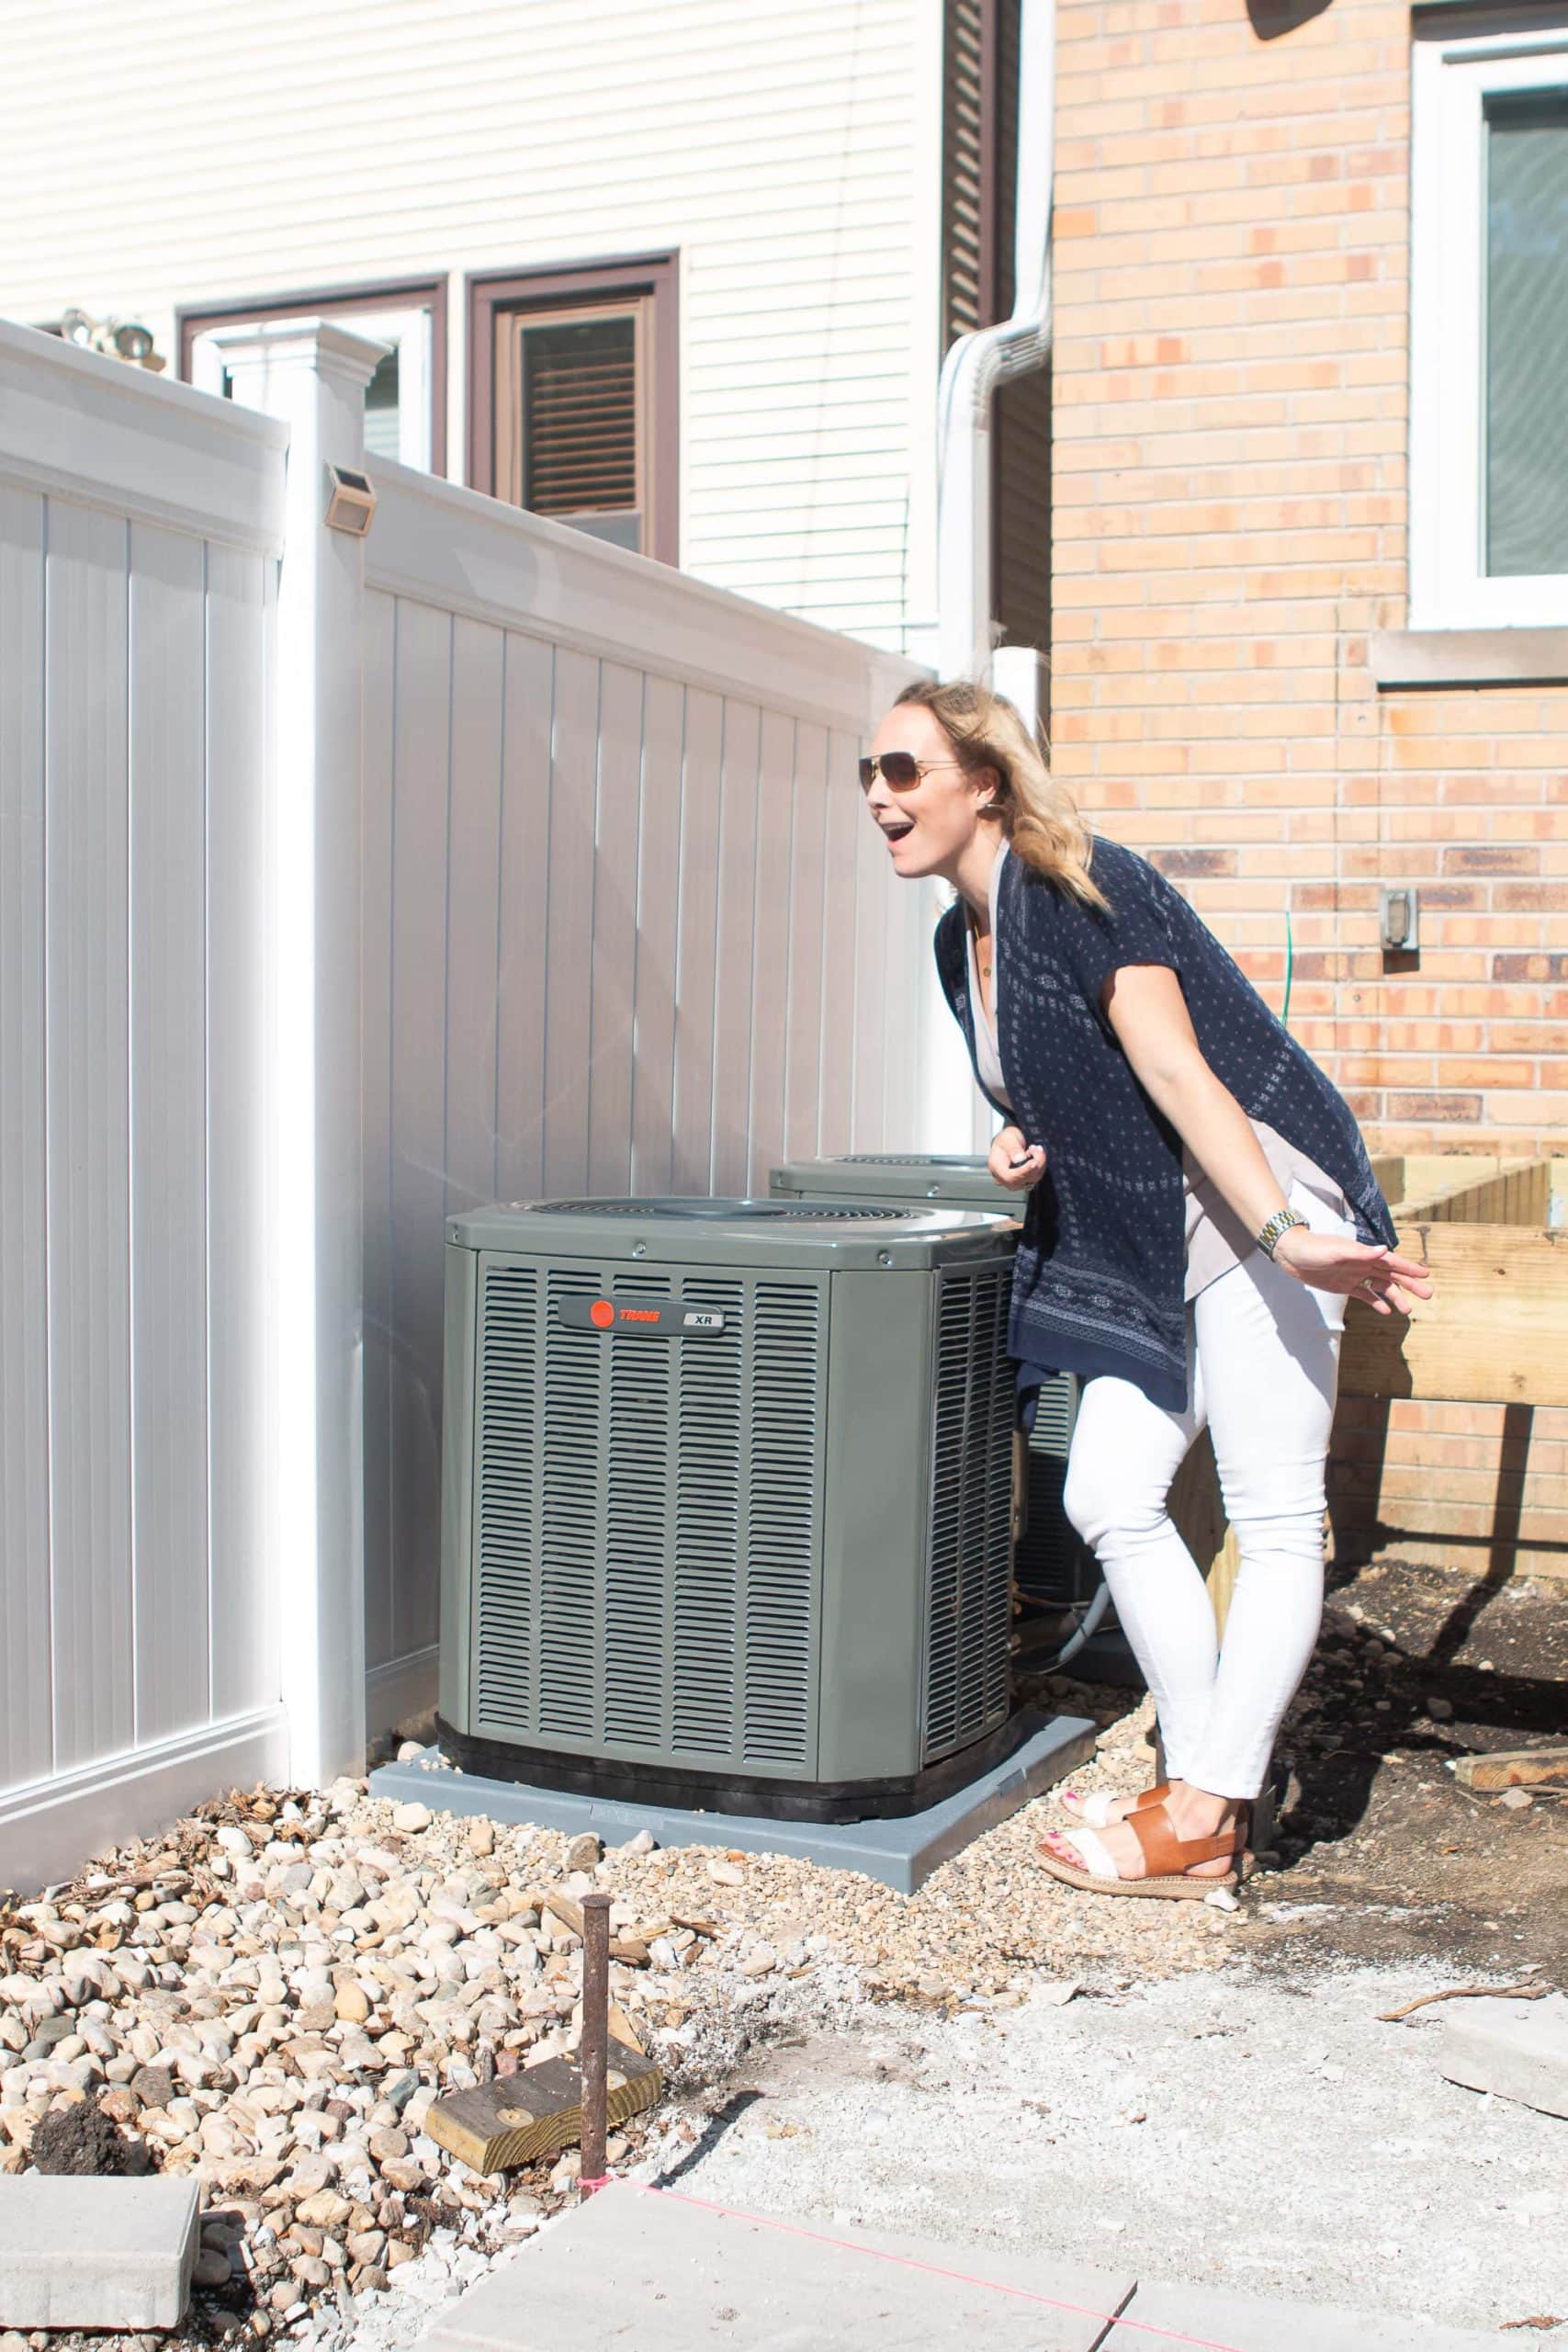 HVAC system and air conditioner from Trane